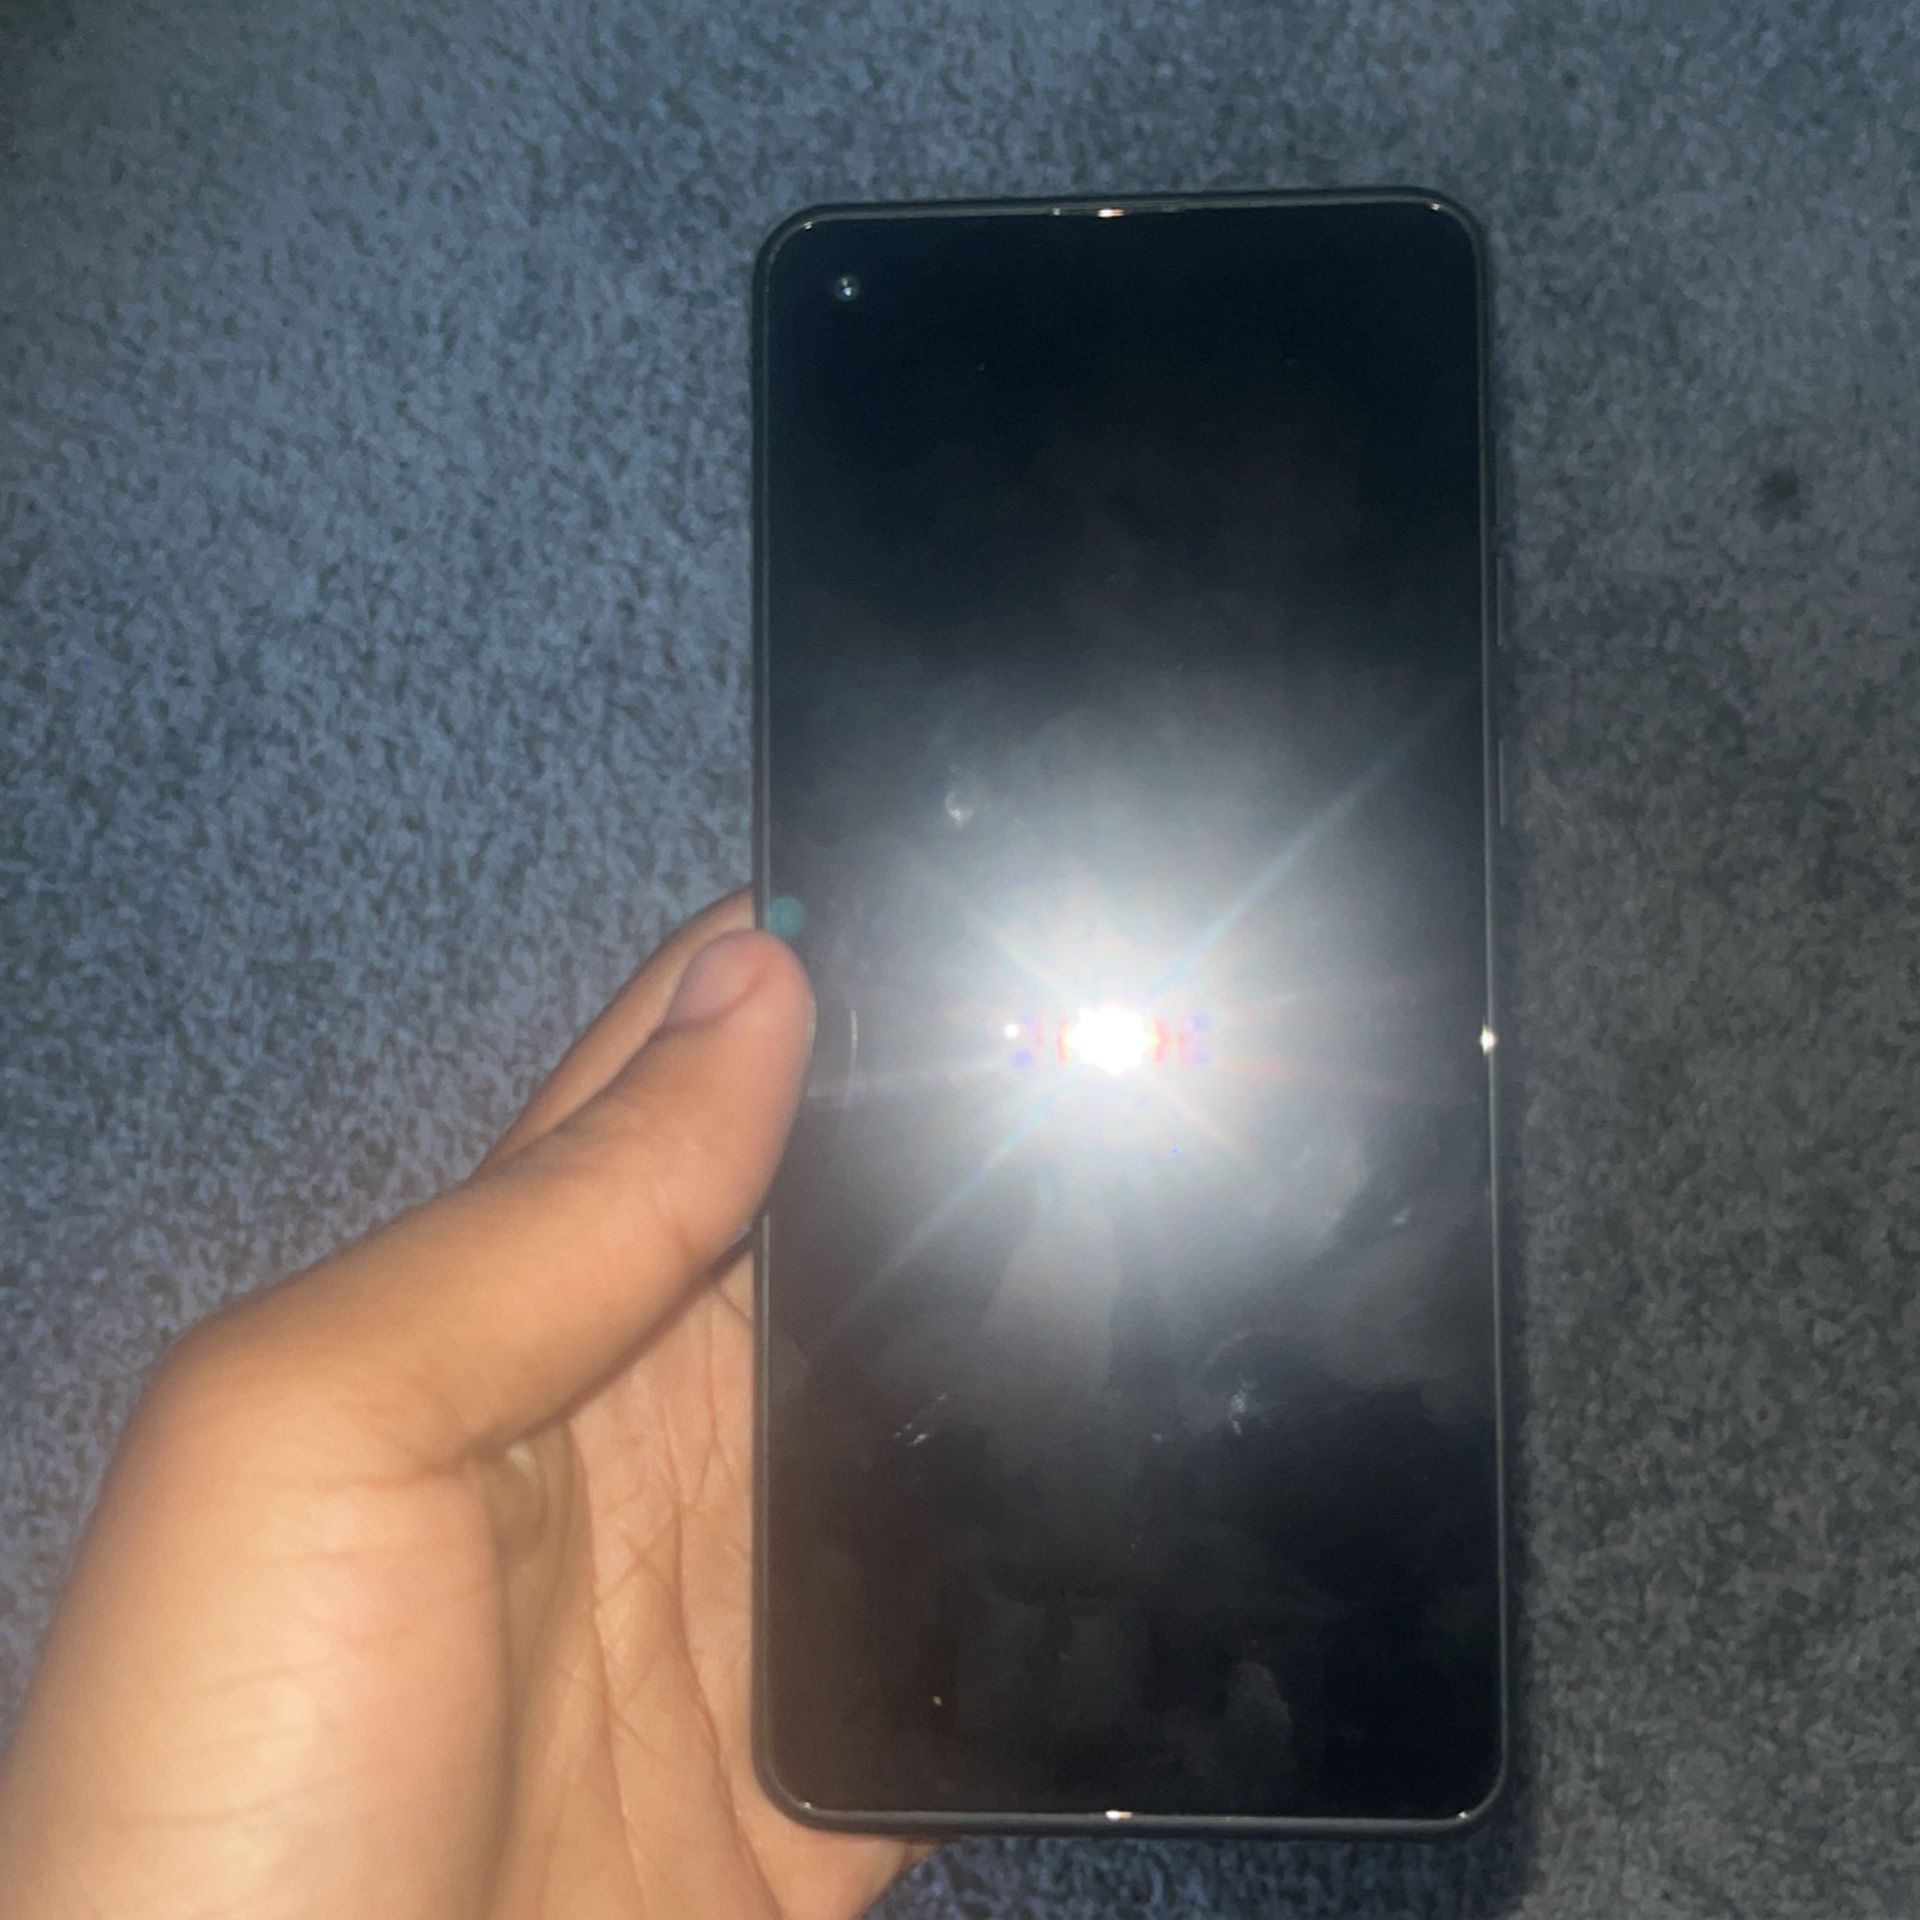 Samsung Phone Doesn’t Work(for Parts)